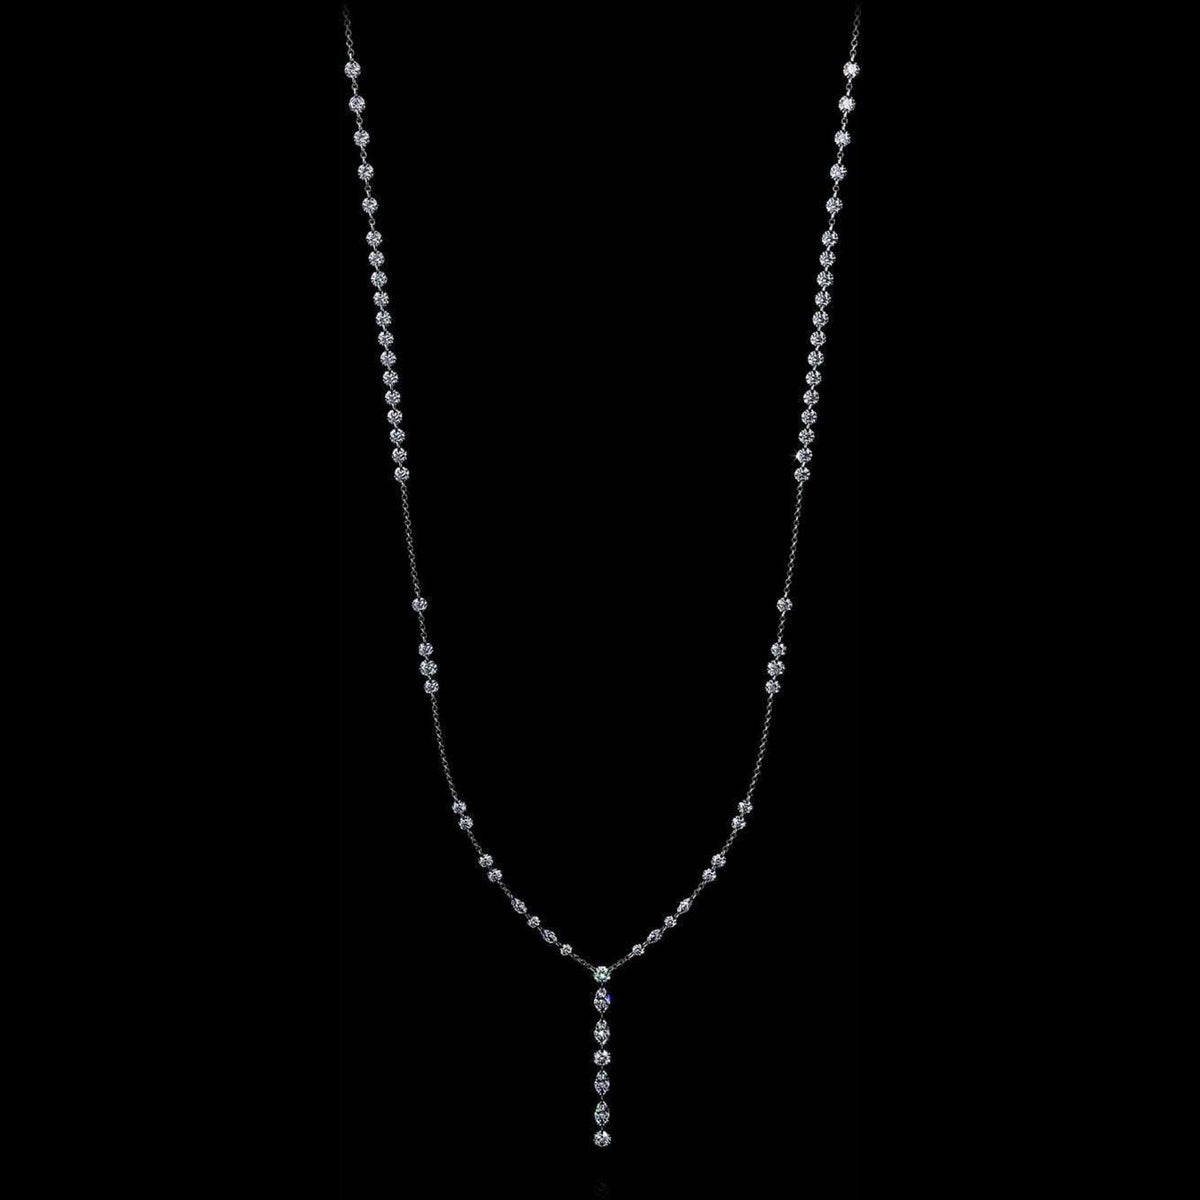 Aresa New York - Lovelace Note E Necklaces - 18K White Gold with 3.15 cts. of Diamonds